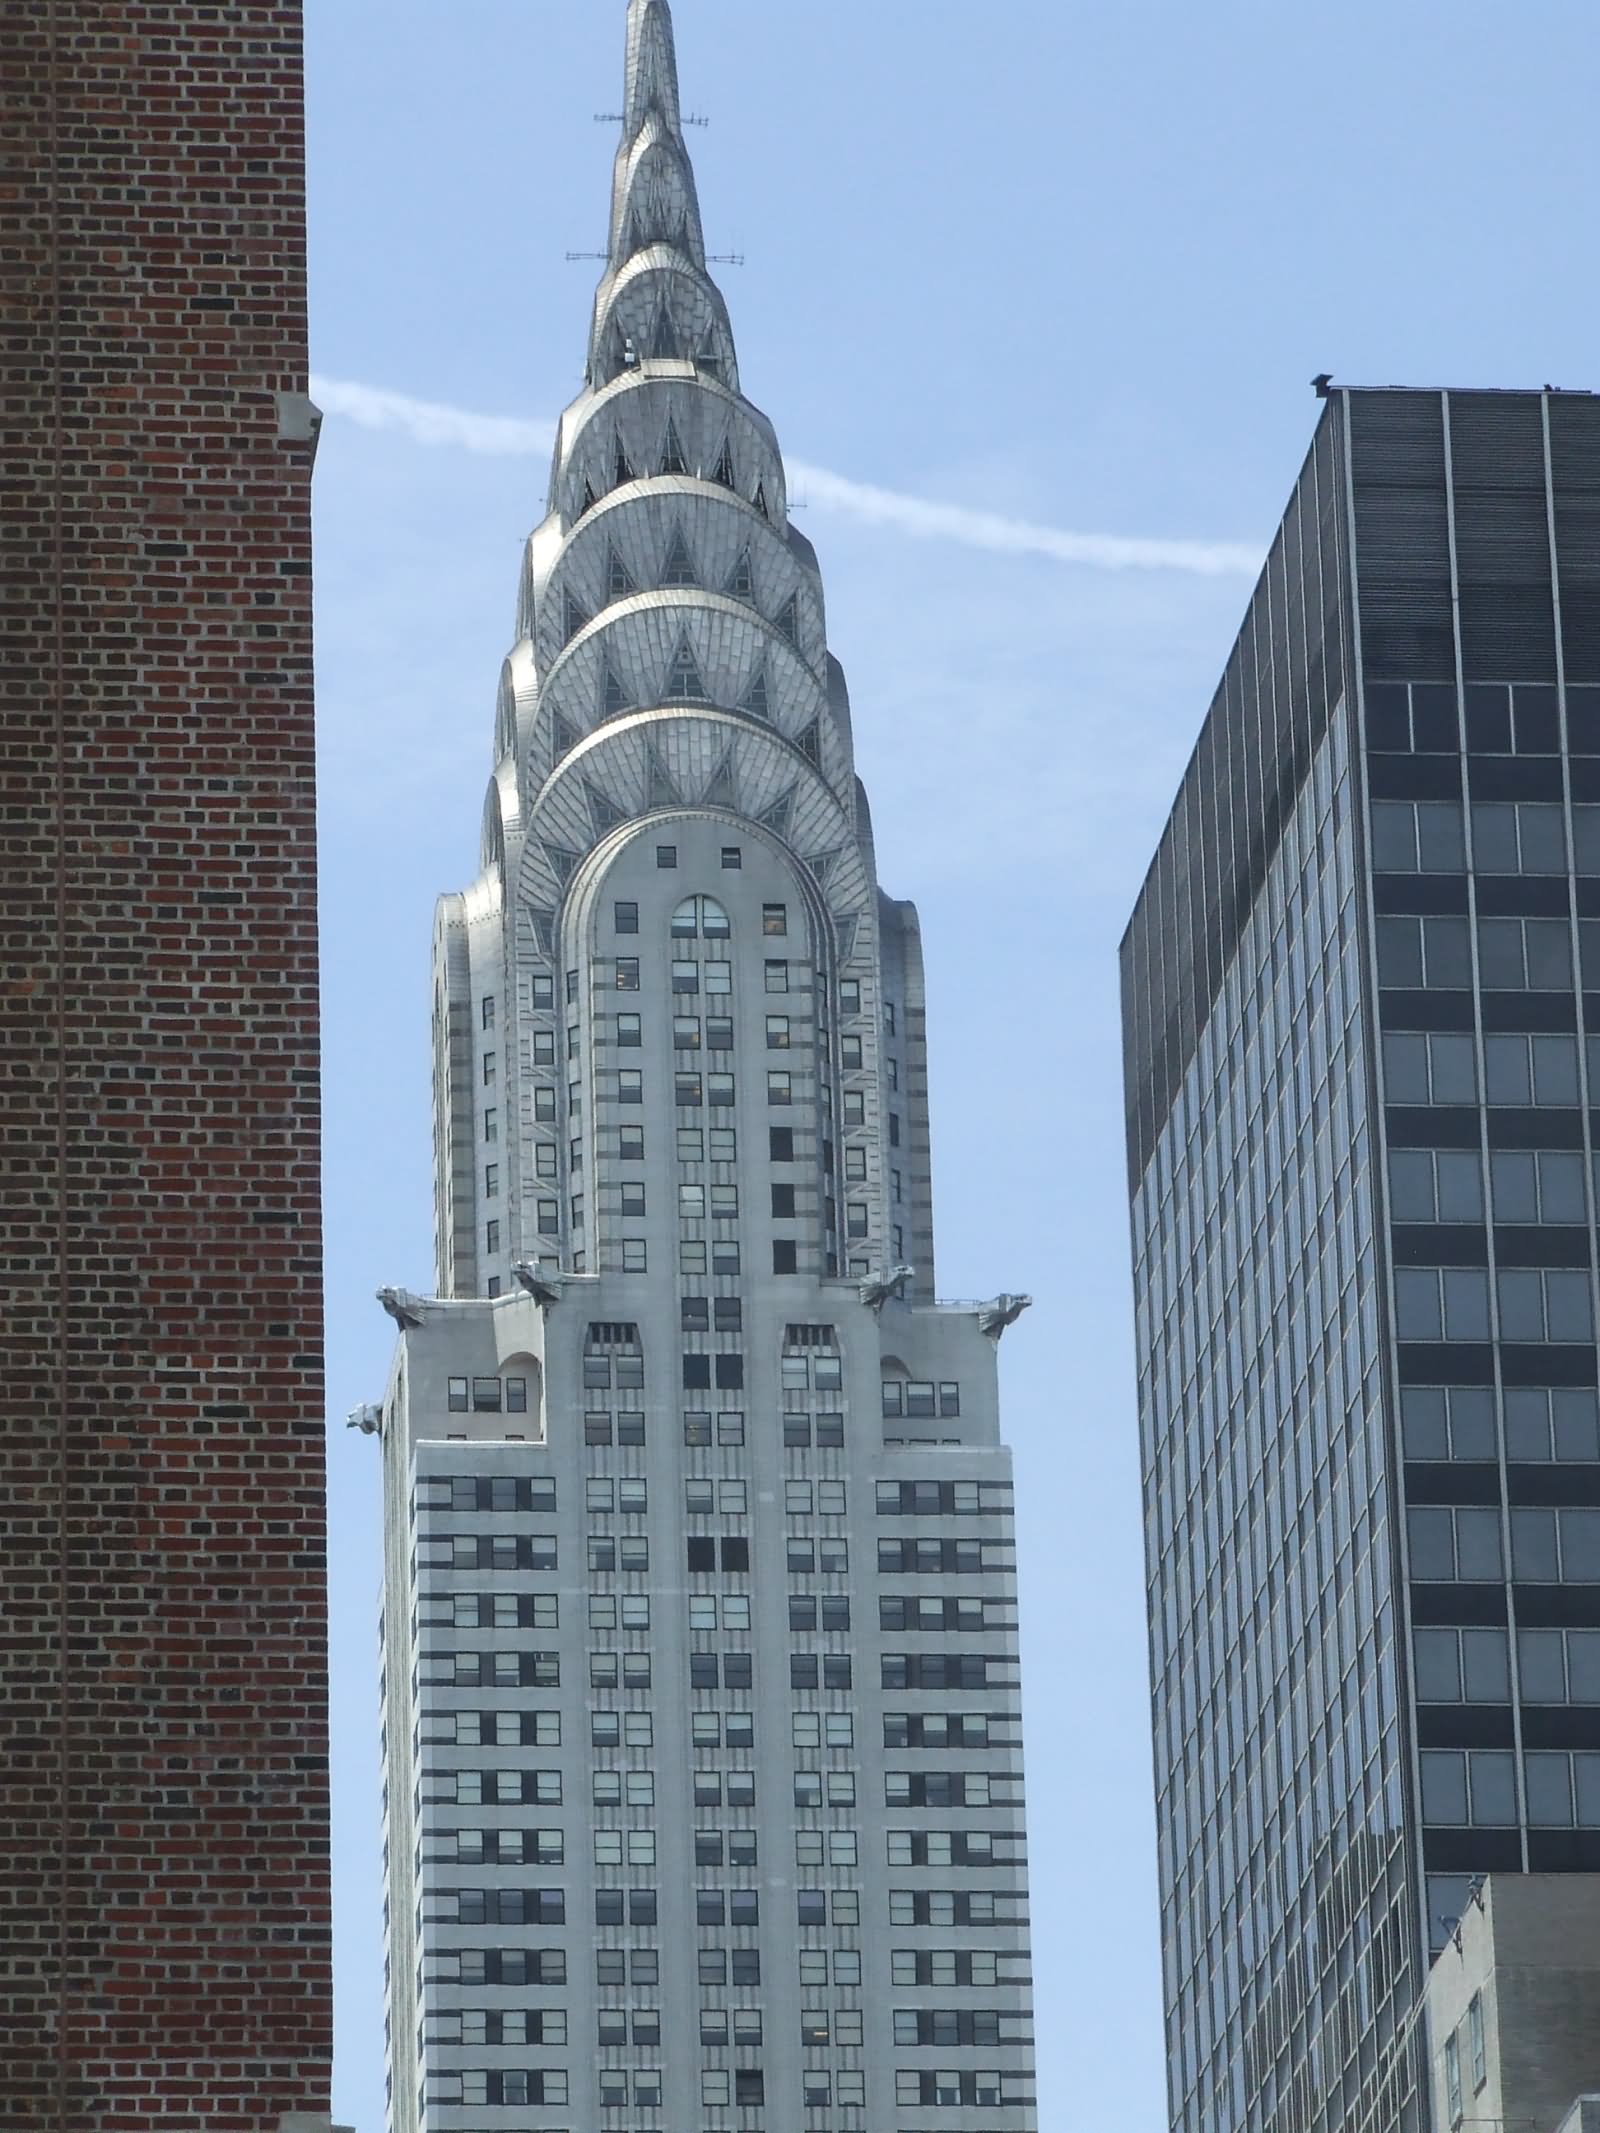 25 Amazing Chrysler Building, Manhattan Pictures And Photos